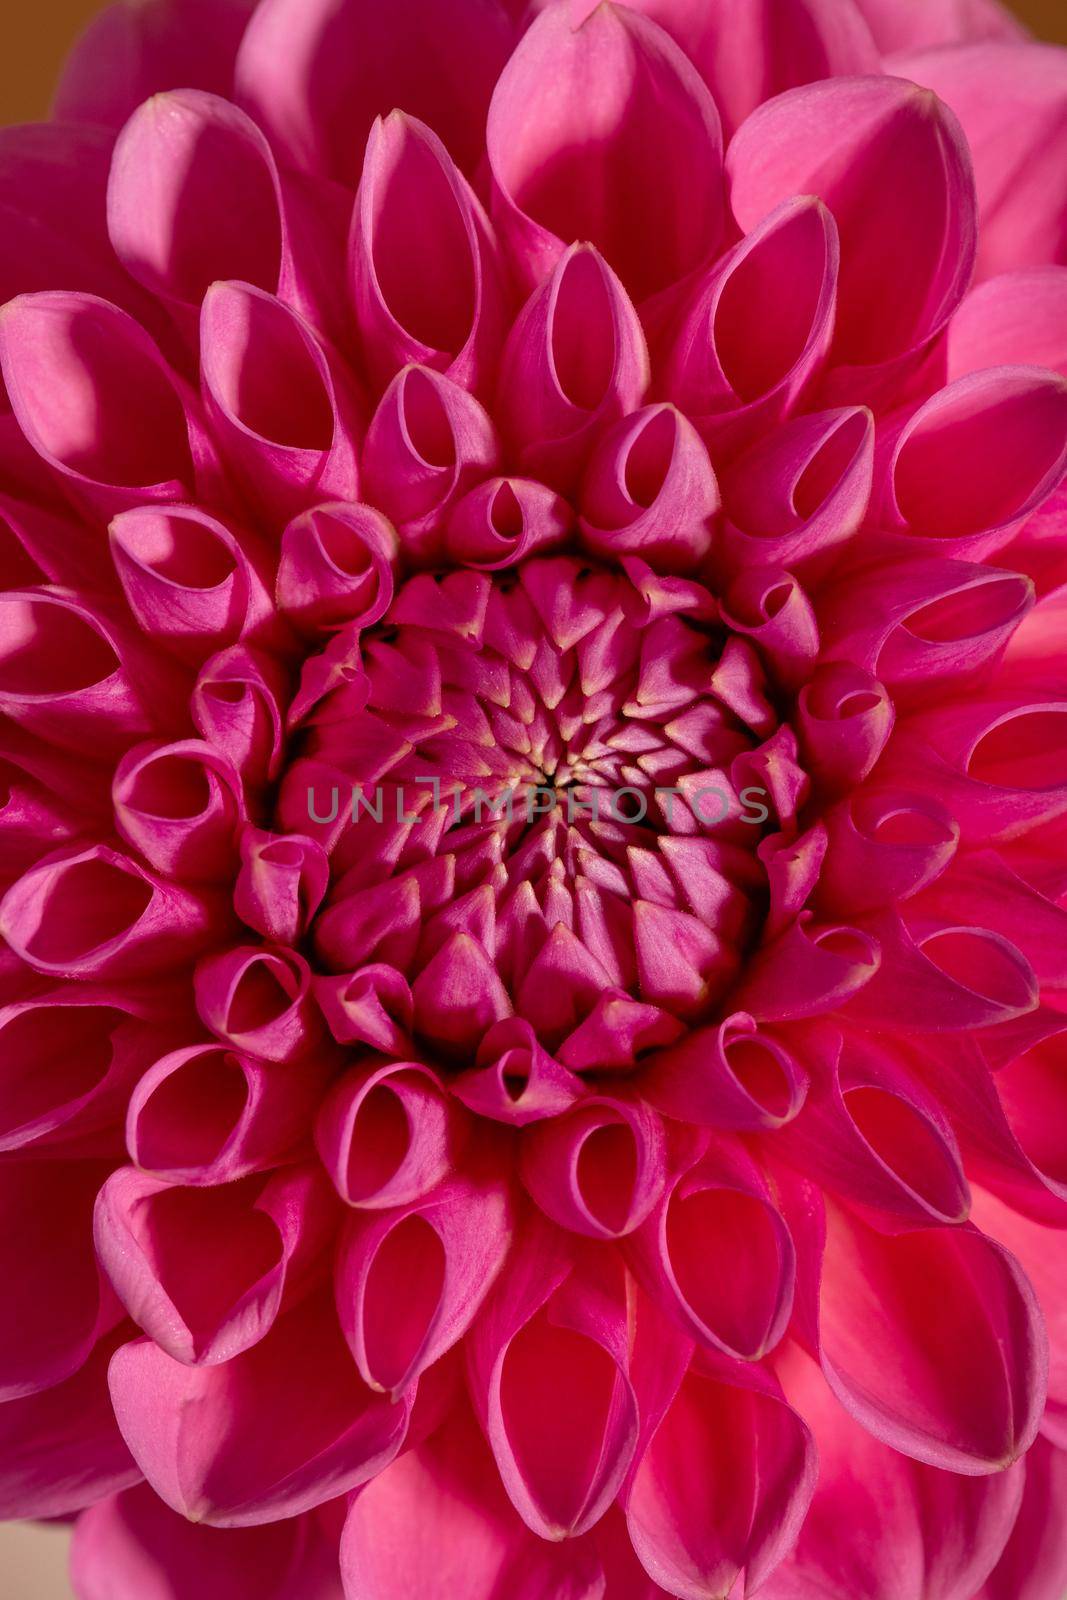 Pink Dahlia Flower on brown background. Beautiful ornamental blooming garden plant with clipping path. by katrinaera